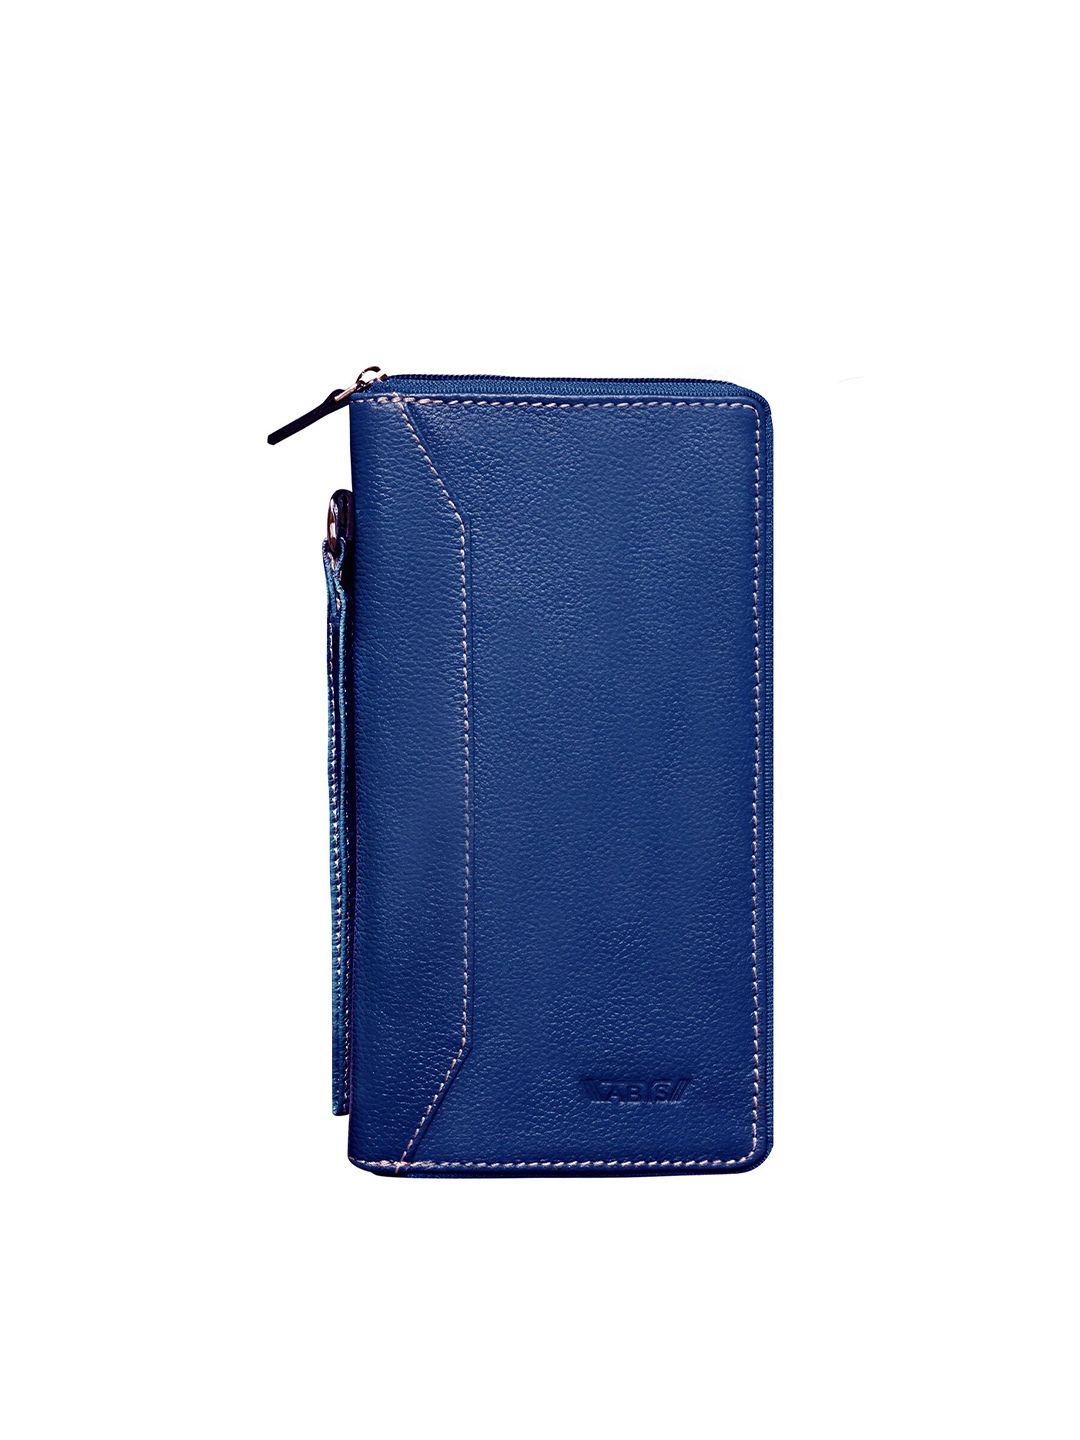 ABYS Unisex Blue Textured Leather Passport Holder Price in India